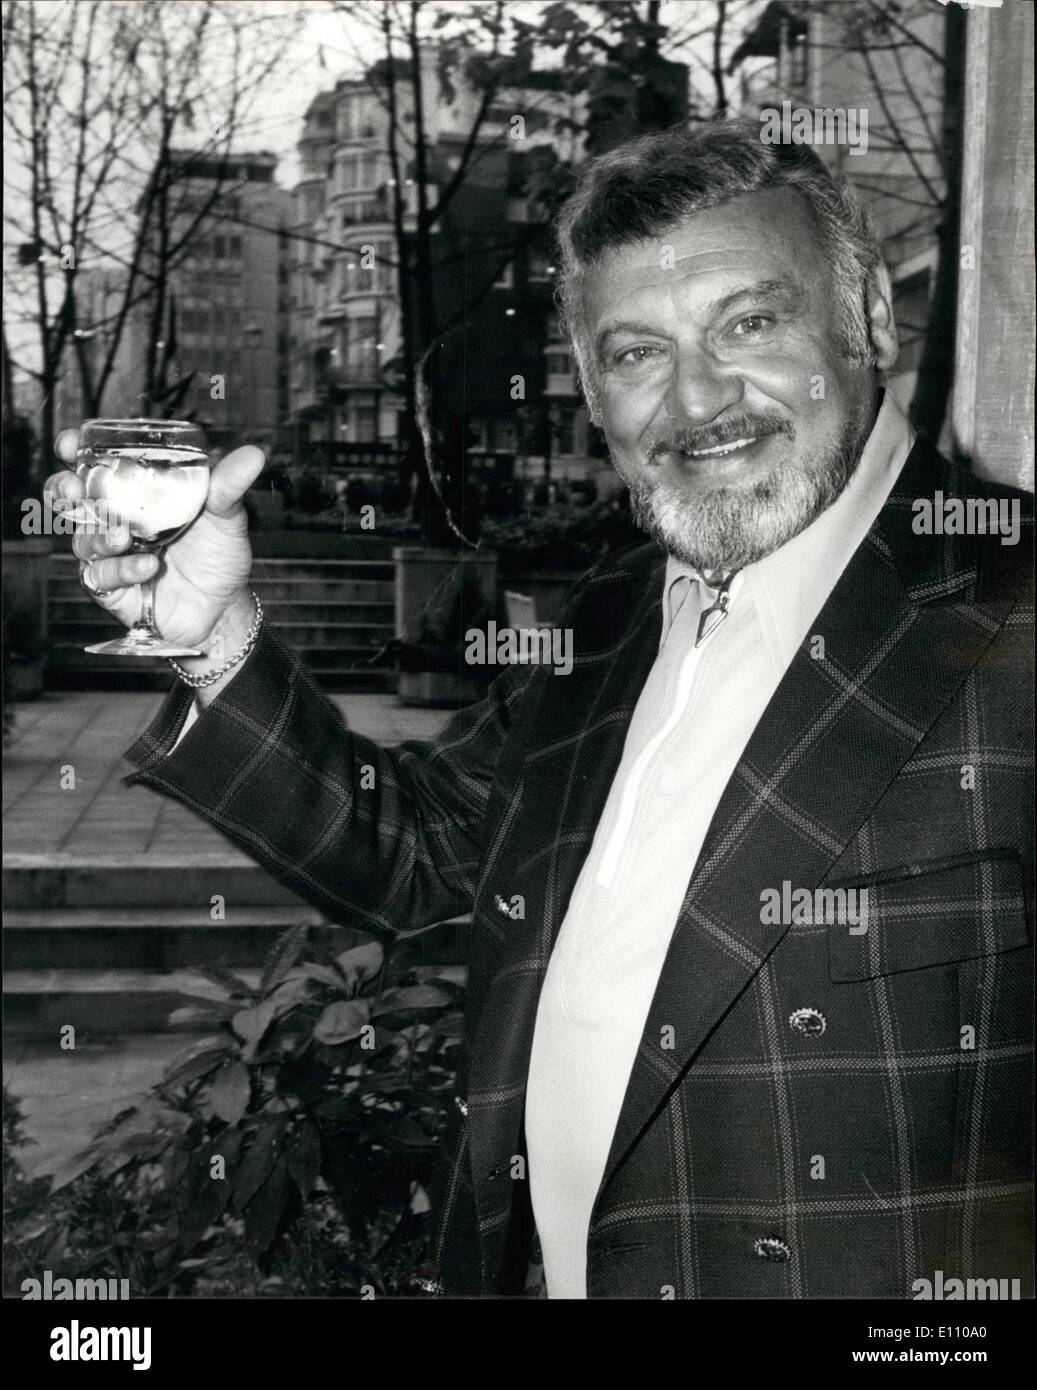 Nov. 11, 1974 - Frankie Lane In London: American singer Frankie Laine, has arrived in London to undertake a British tour, which Stock Photo